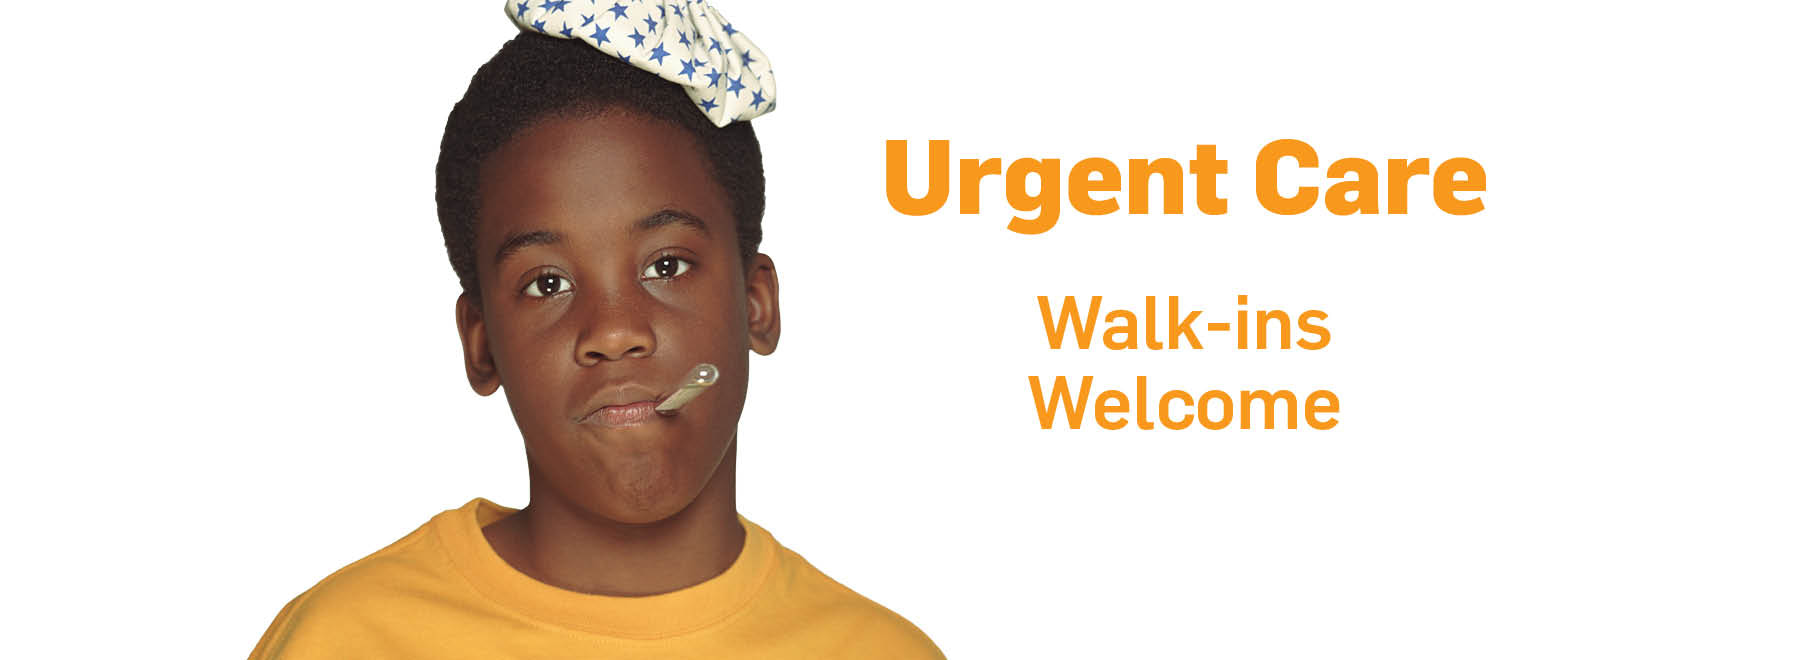 A boy with an ice pack on his head and a thermometer in his mouth and next to him is text that says Urgent Care Walk-ins Welcome